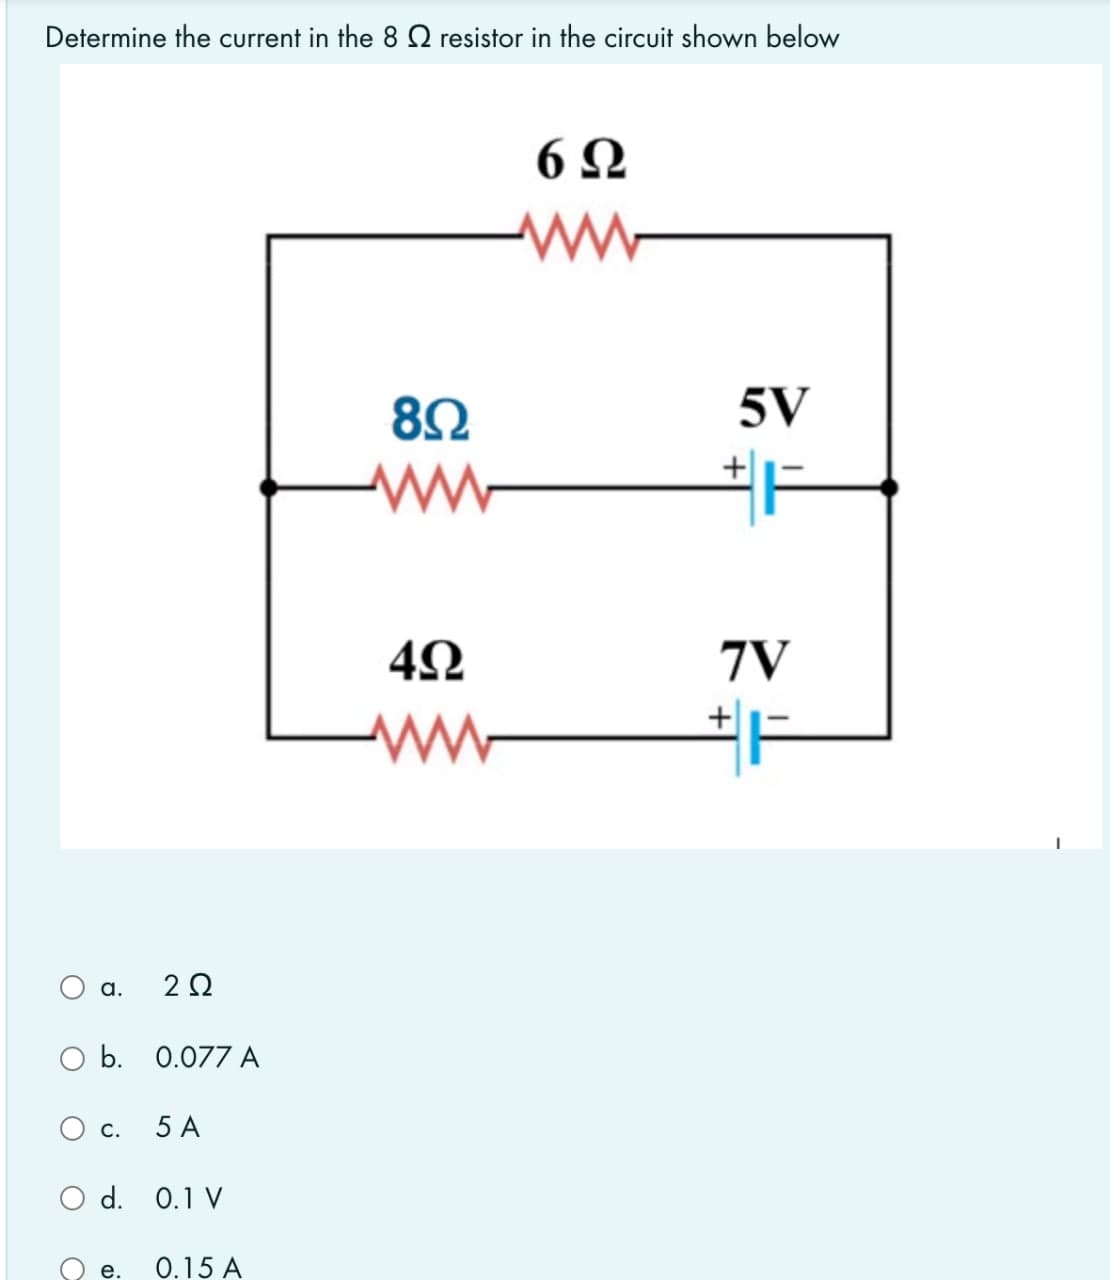 Determine the current in the 8 Q resistor in the circuit shown below
8Ω
5V
7V
+|
a.
O b. 0.077 A
С.
5 A
O d. 0.1 V
0.15 A
